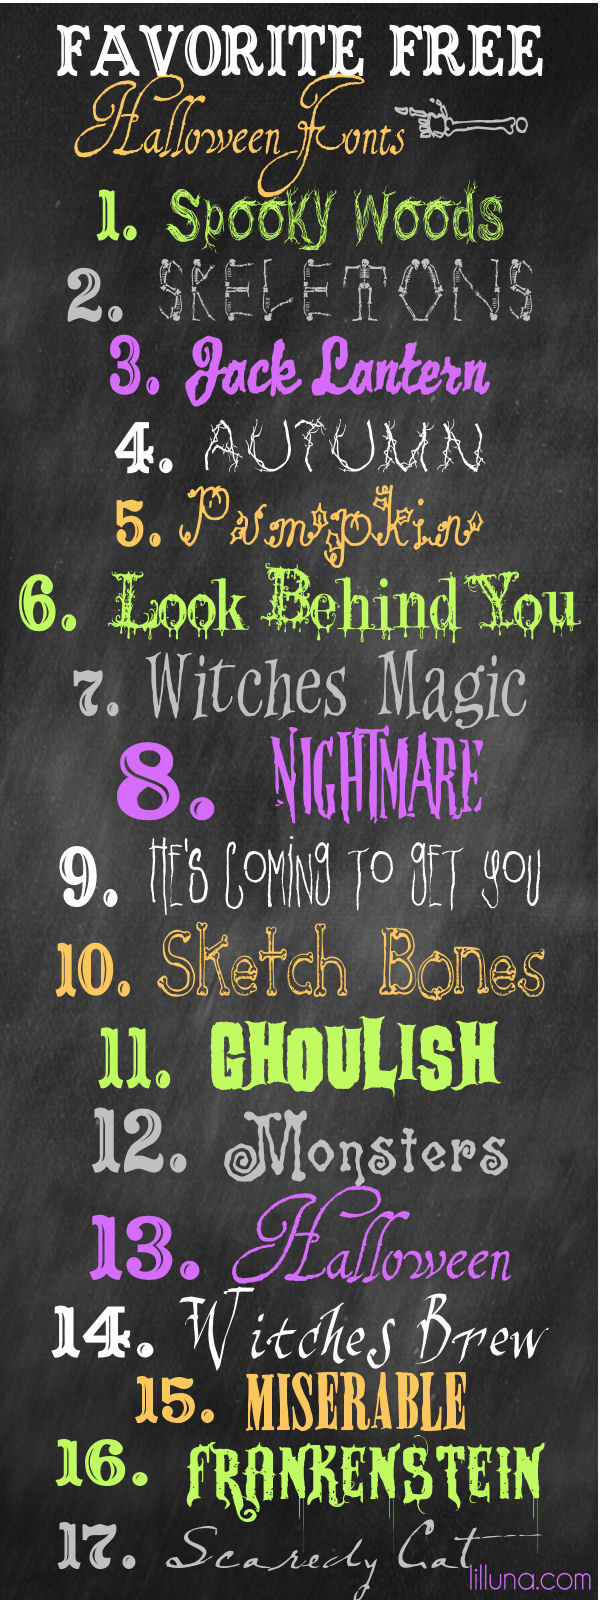 Favorite Free Halloween Fonts on { lilluna.com } Use for so many things!